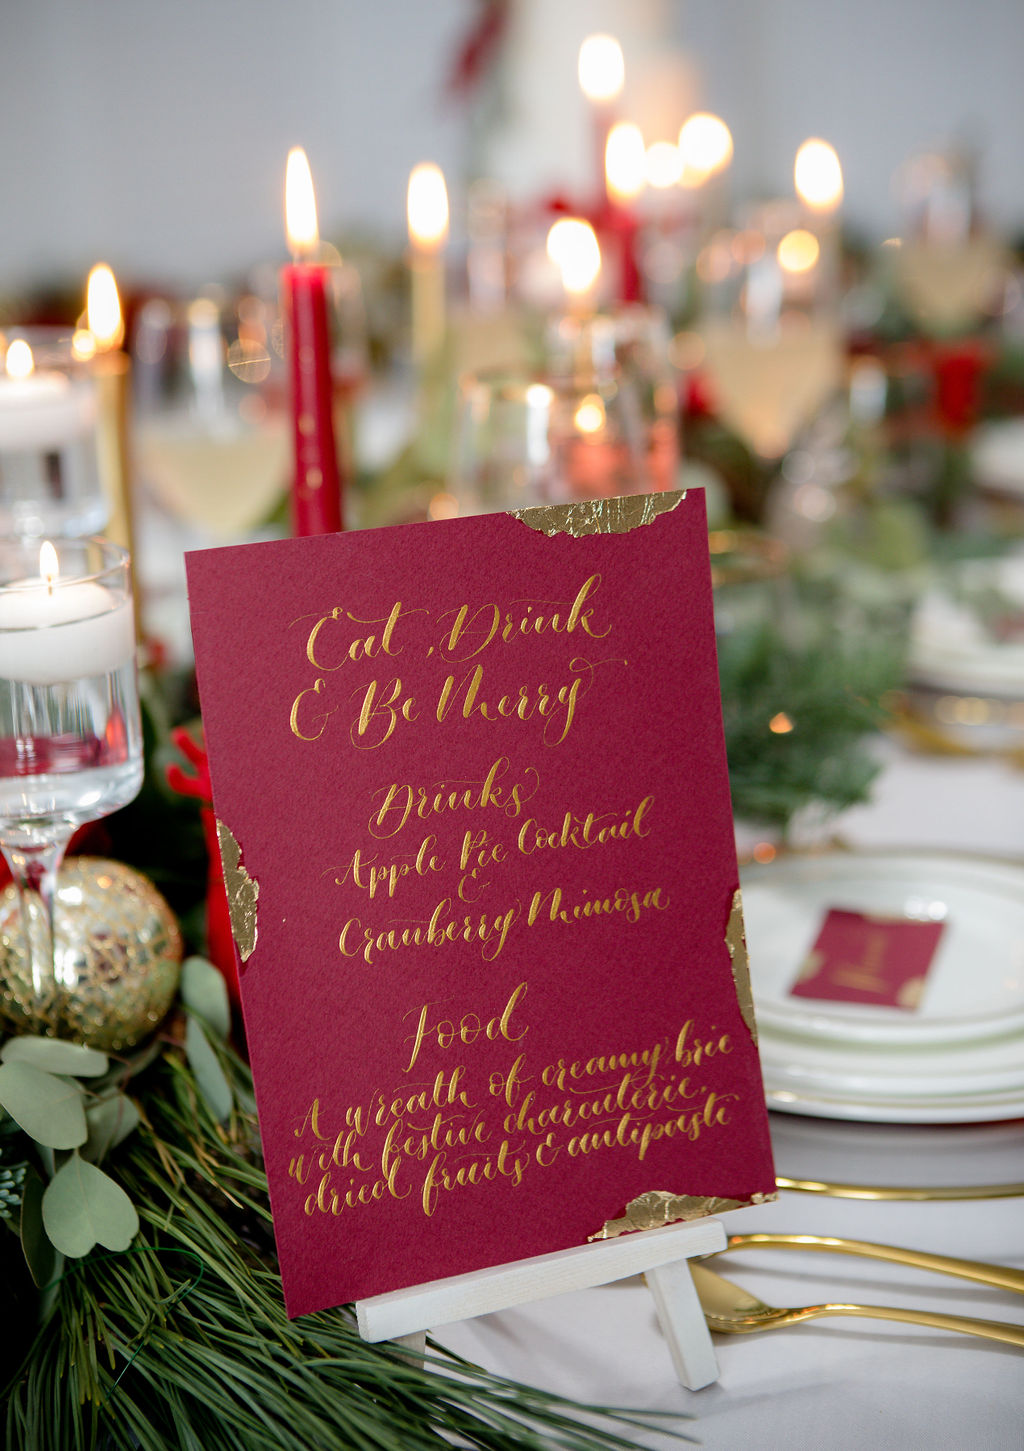 7 Christmas Table Styling Tips for your Luxury Christmas Wedding